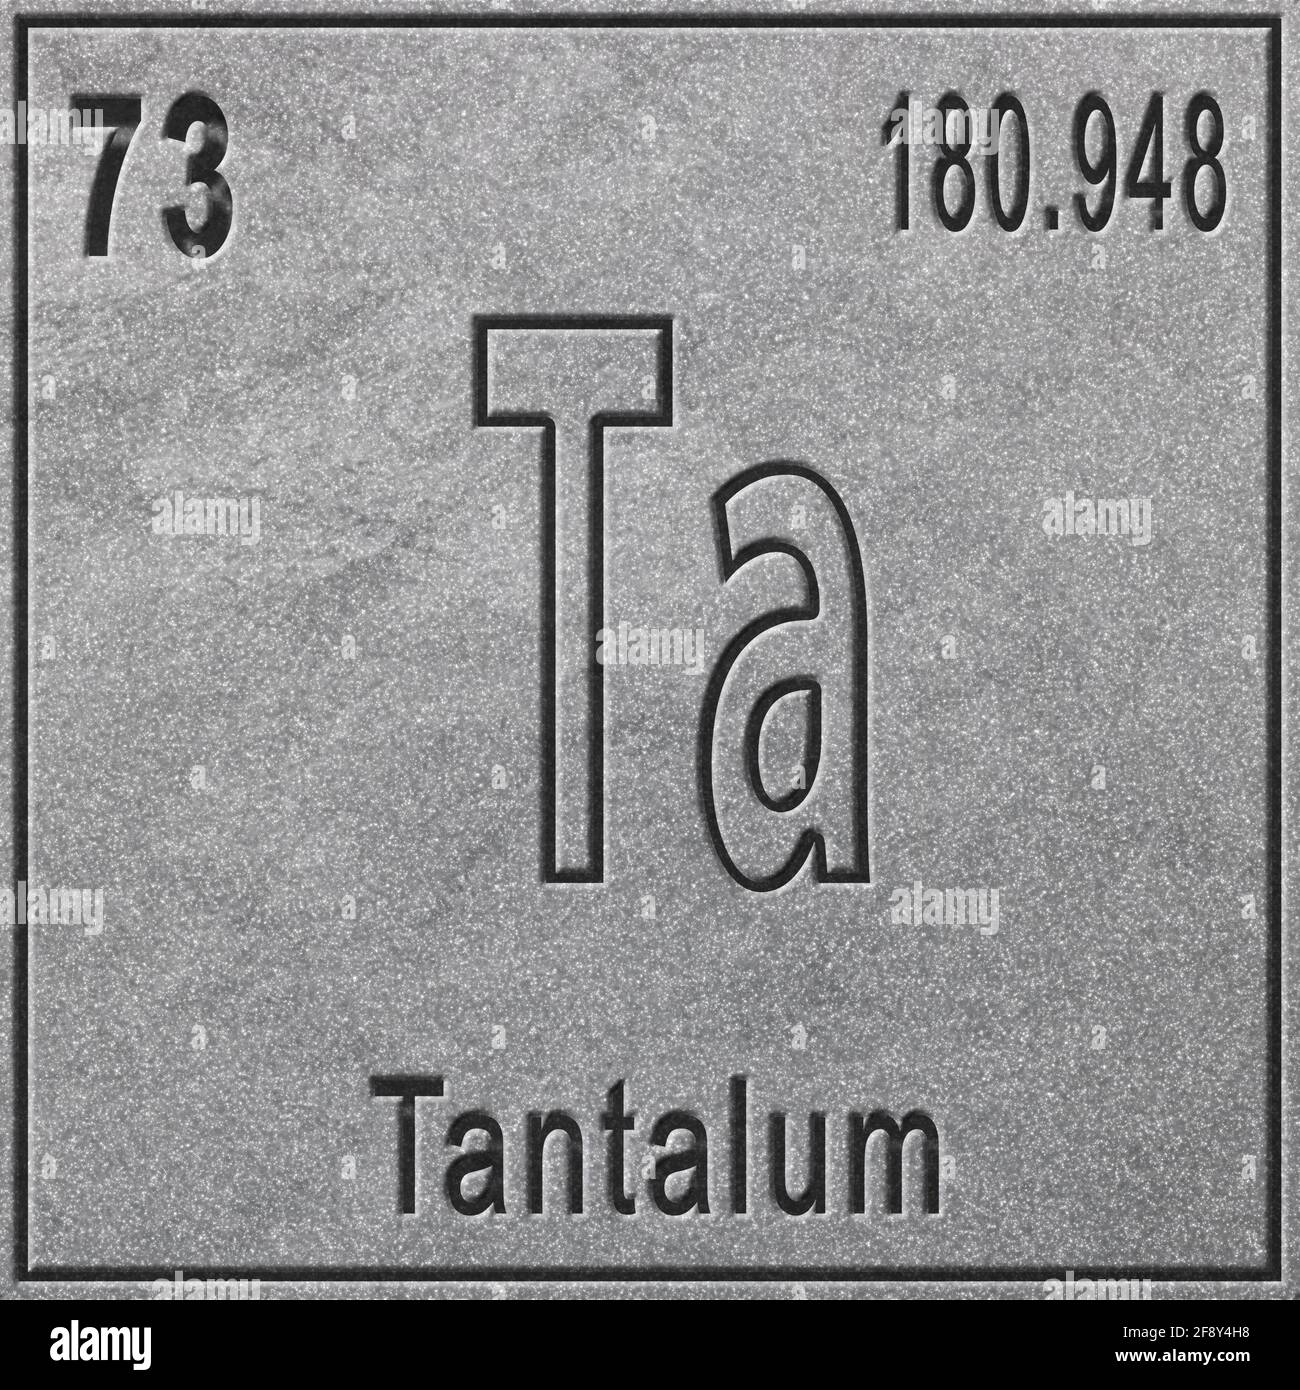 Tantalum chemical element, Sign with atomic number and atomic weight, Periodic Table Element, silver background Stock Photo